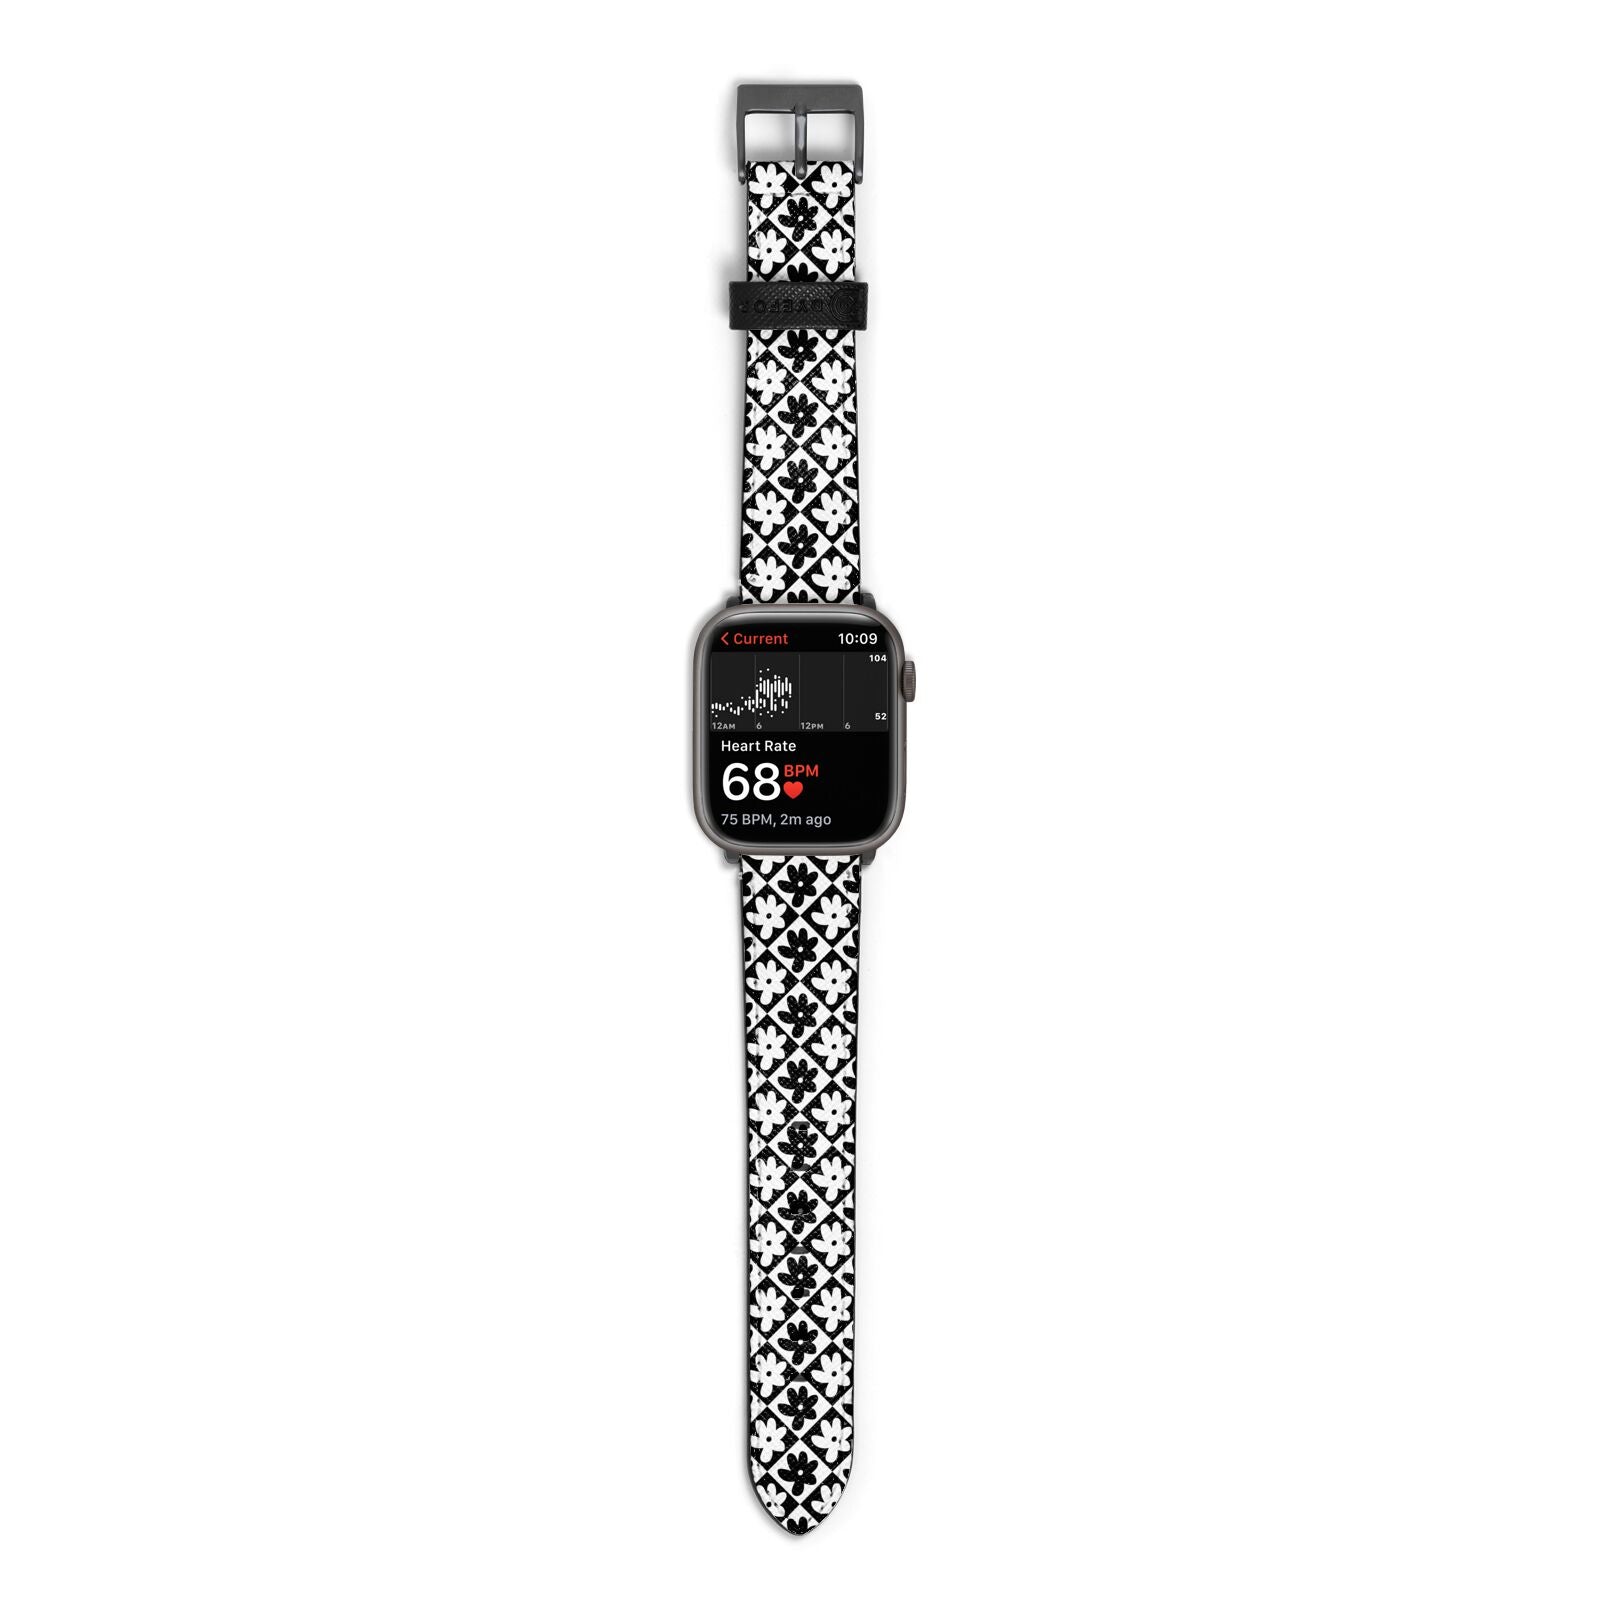 Check Flower Apple Watch Strap Size 38mm with Space Grey Hardware